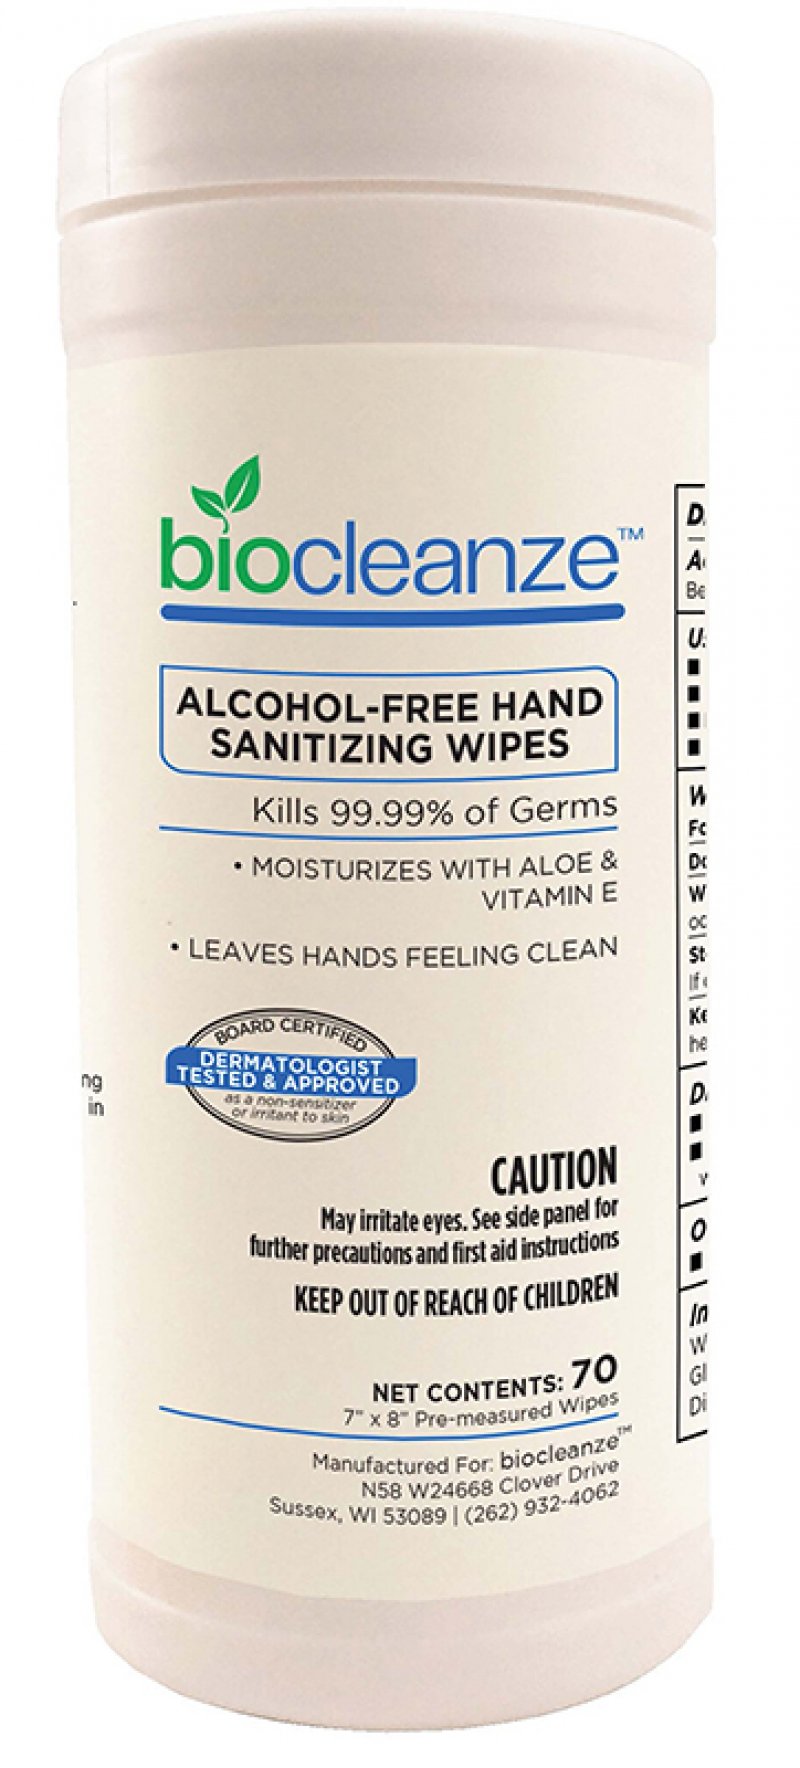 Biocleanze and Sanitizing Alcohol-Free Wipes